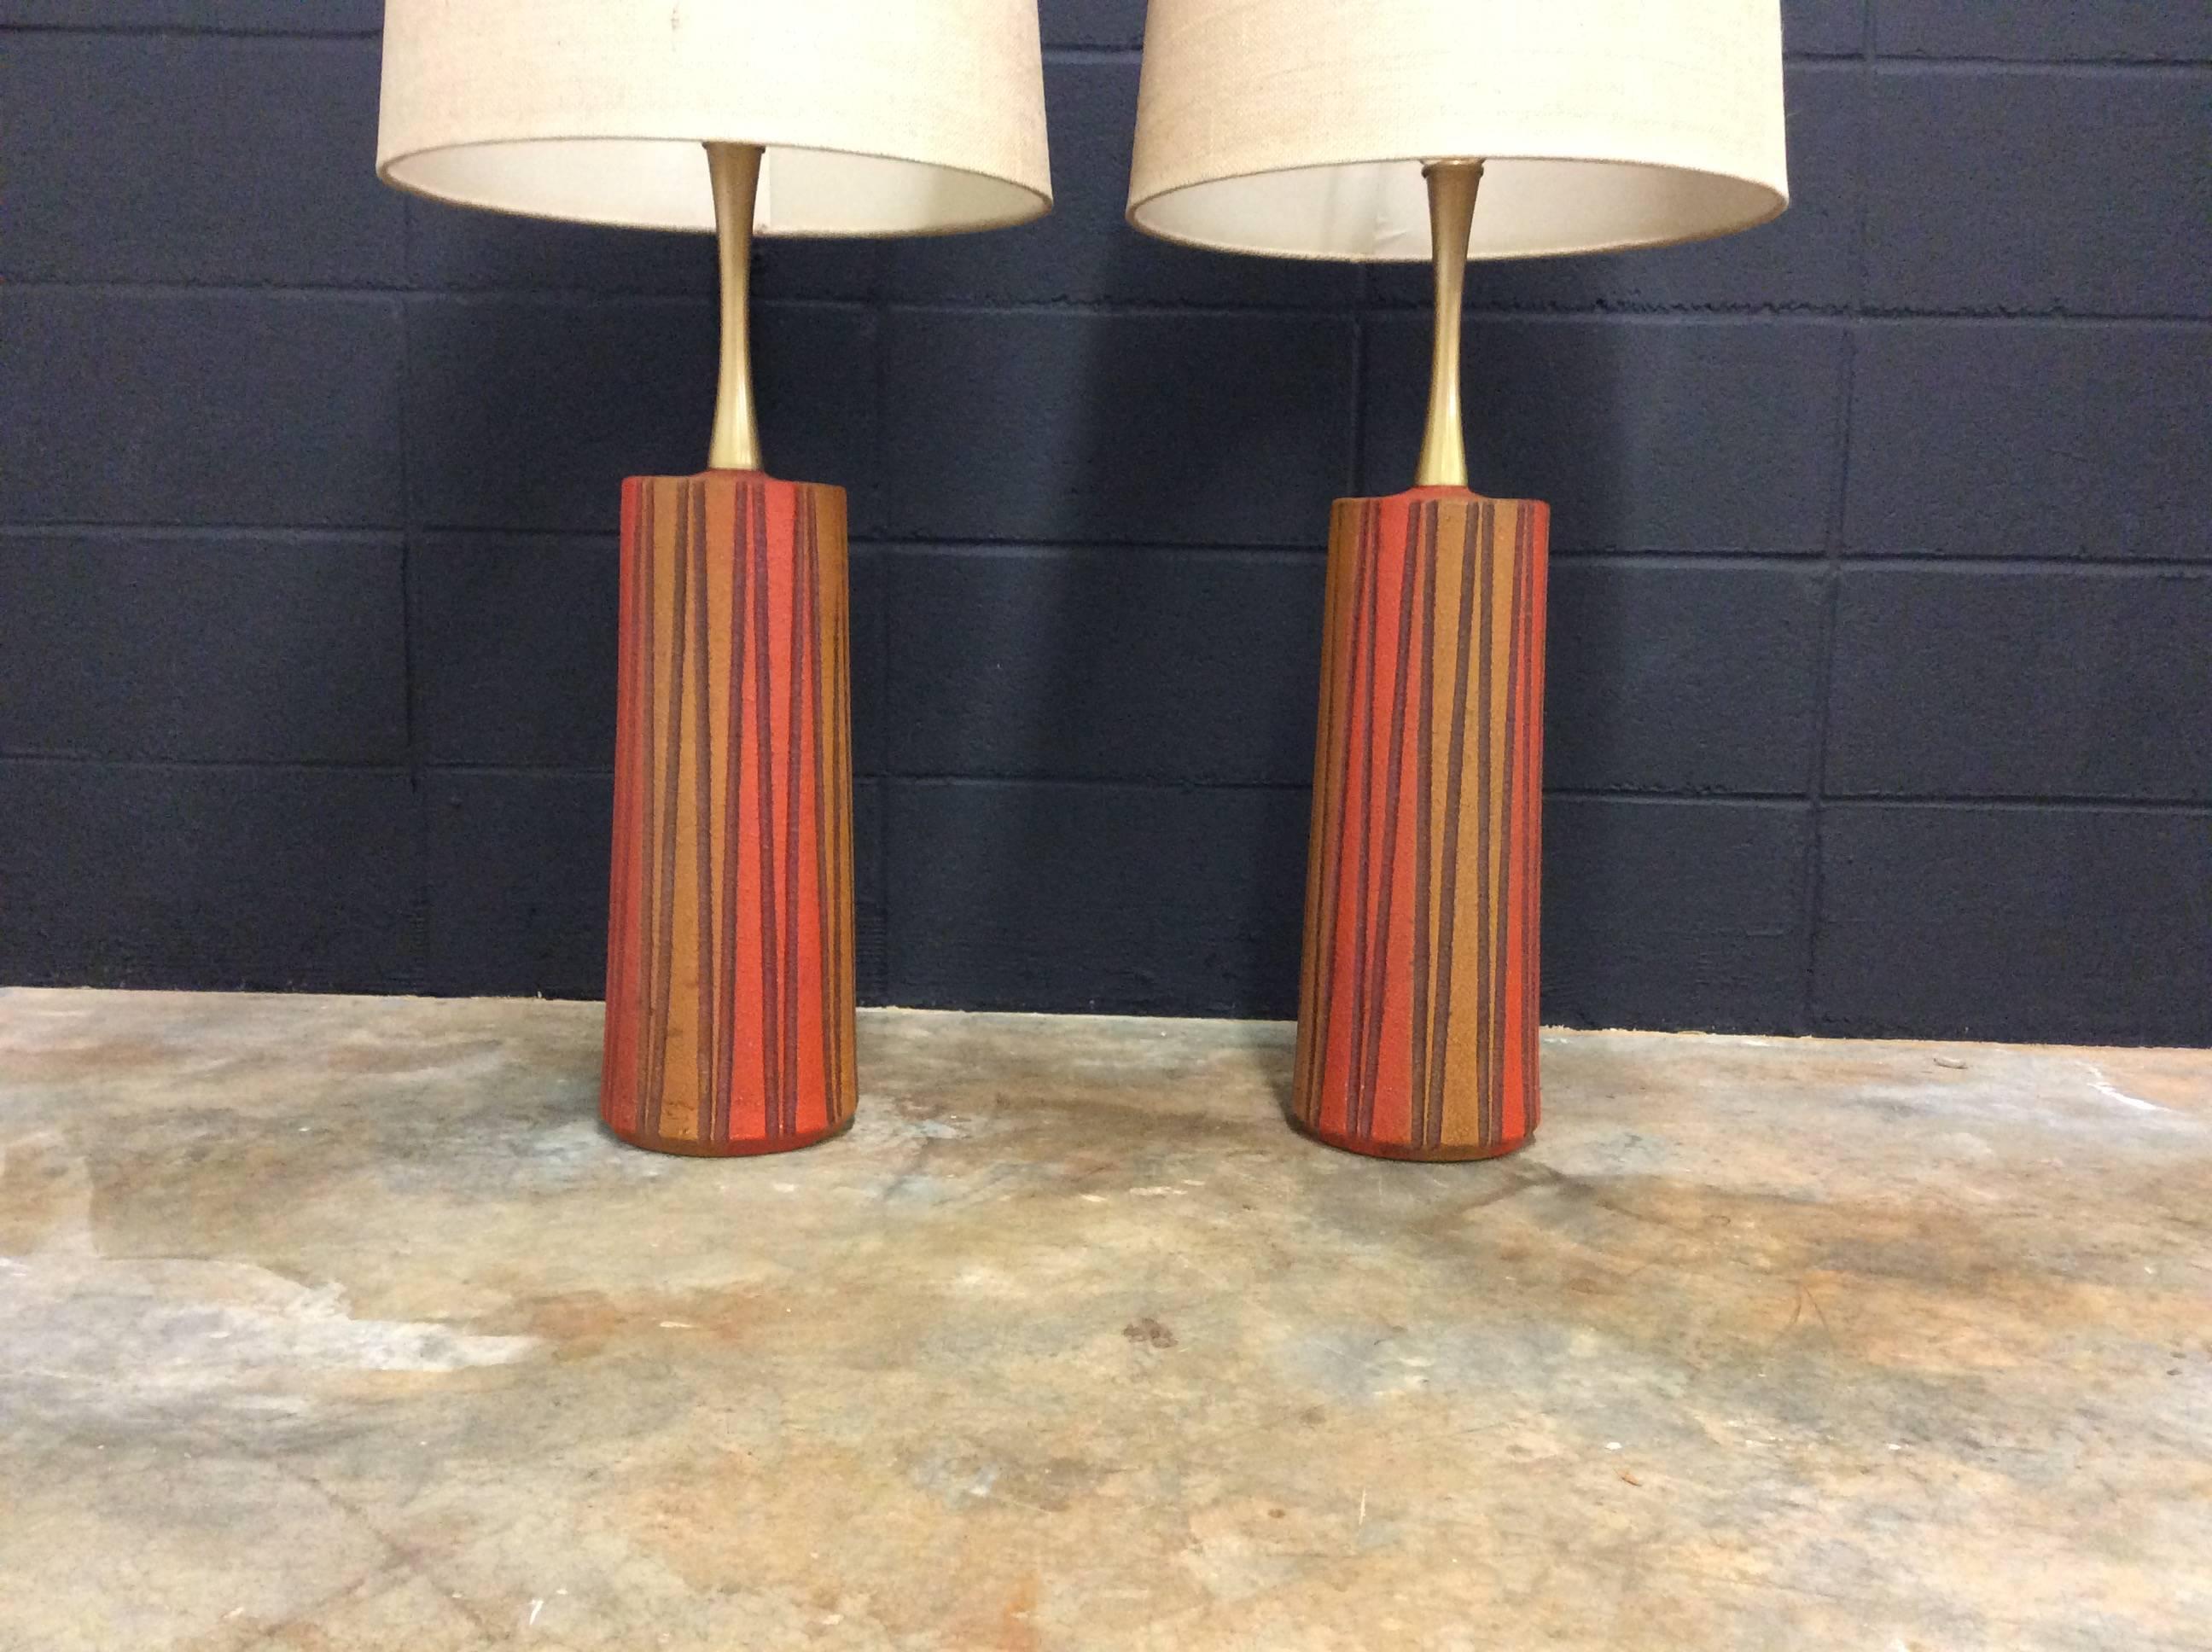 Bold pair of Mid-Century Modern table lamps with amazing colors. The lamps are vintage but have new wiring, new sockets, and new shades lamps are in great condition with very little signs of use. Signed K-21 on the bottom. Lamps are ready for